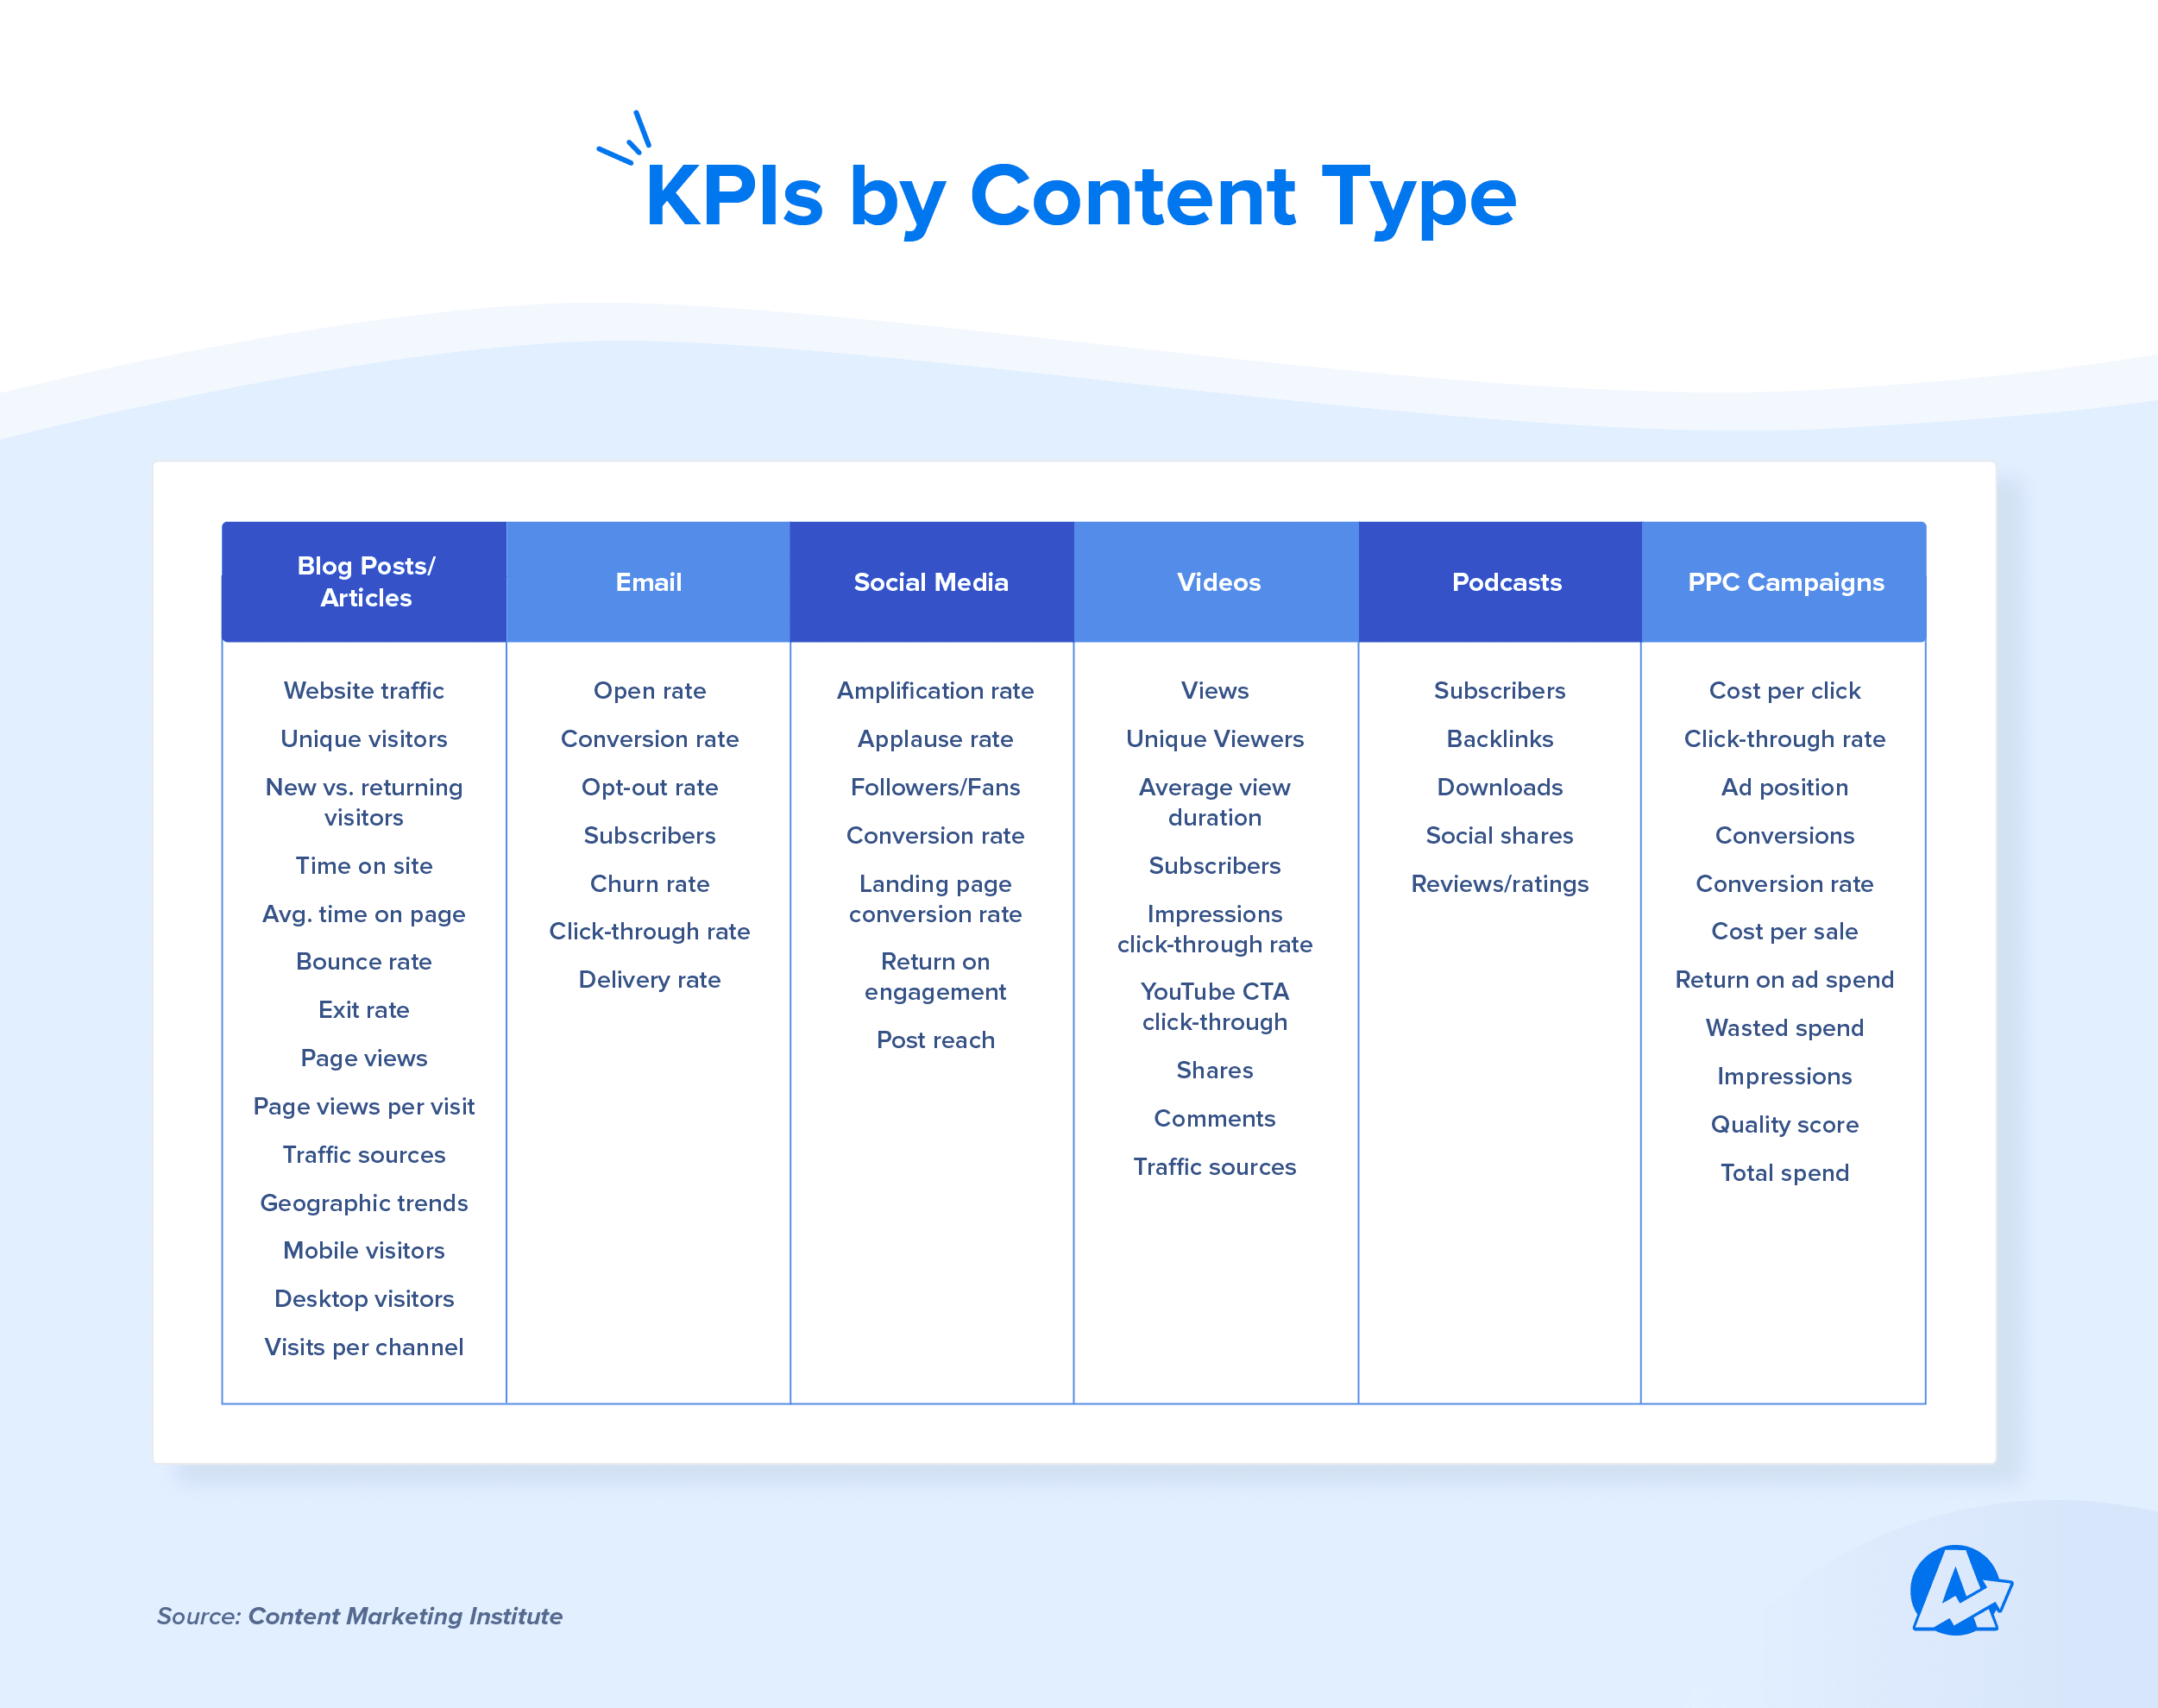 Important KPIs by Content Type